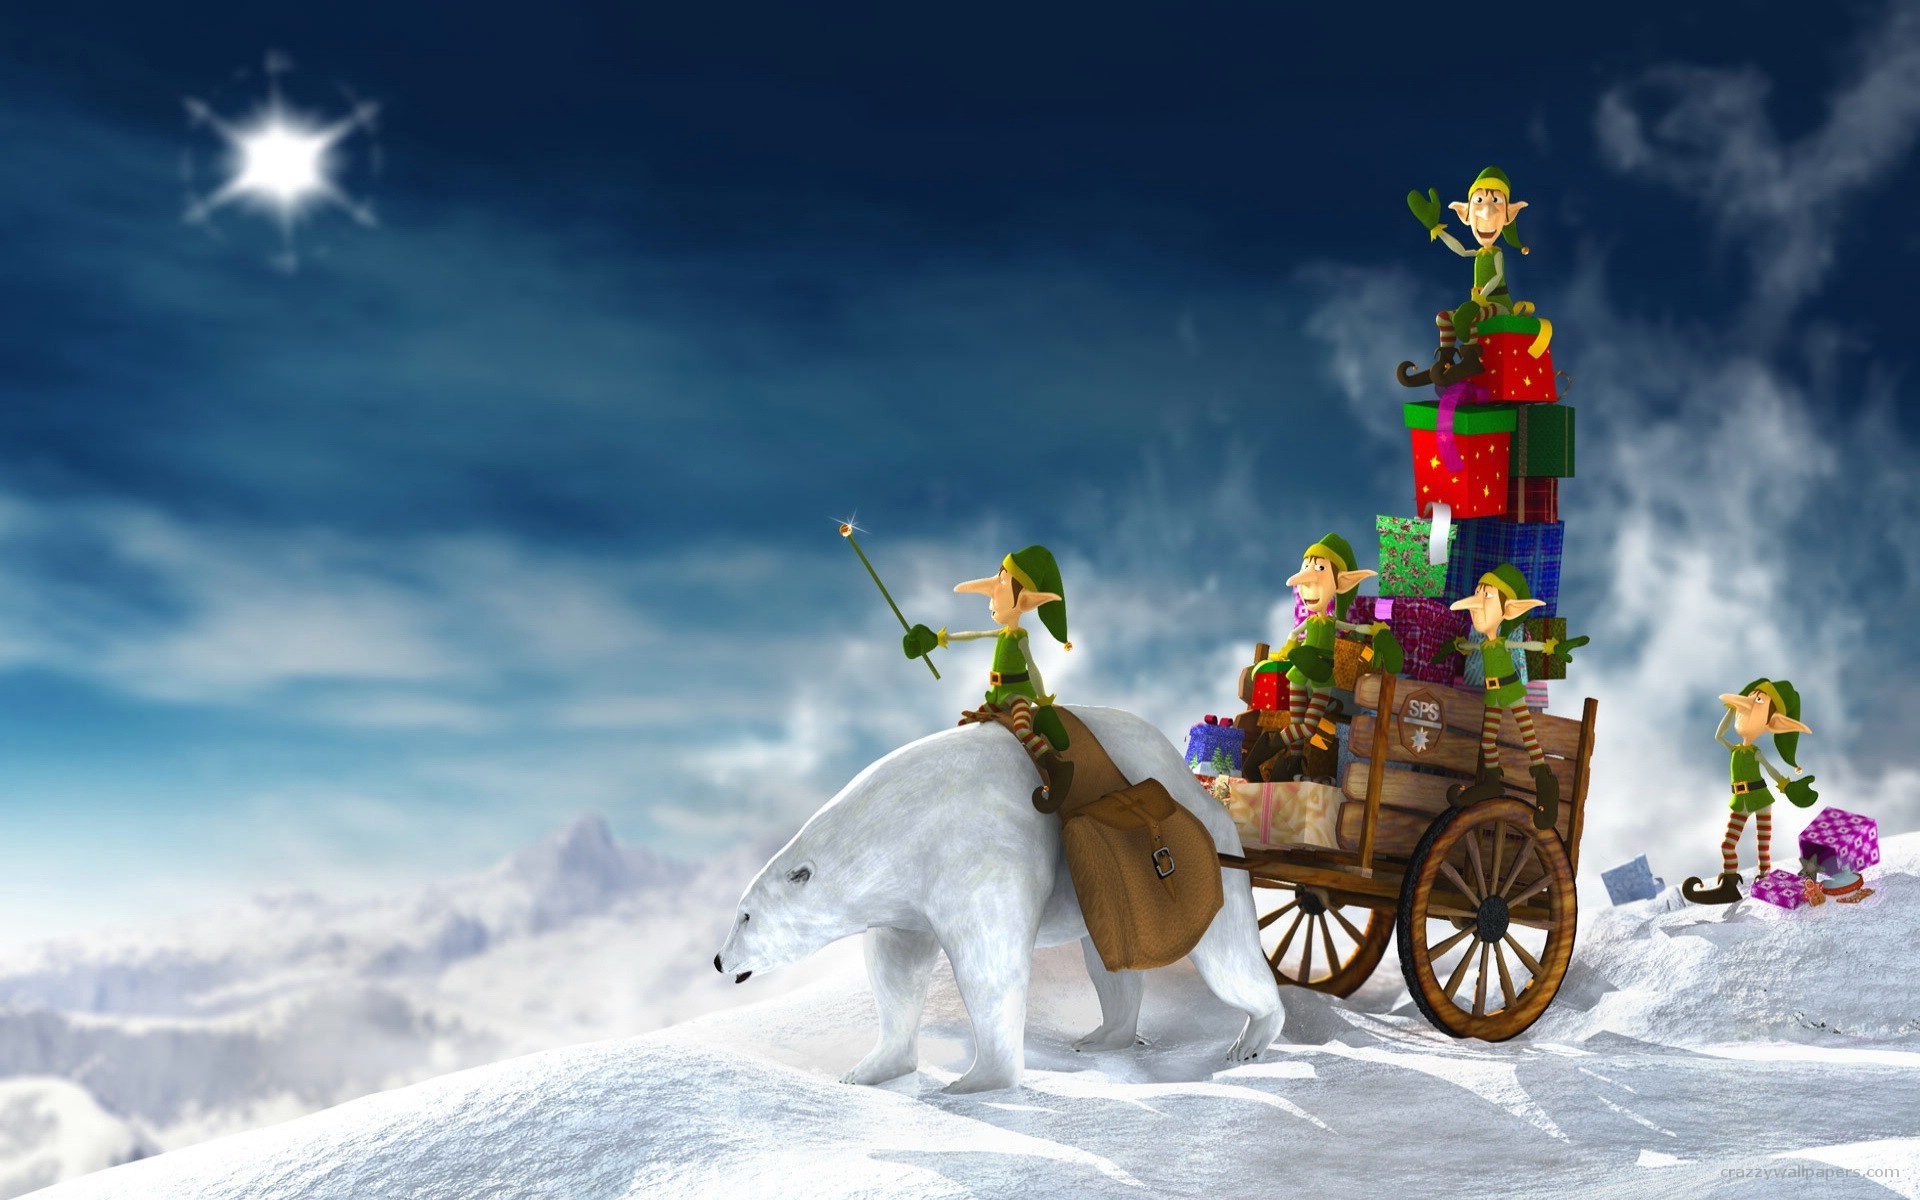 1920x1200 Cool Christmas Desktop Wallpaper | ... spirit of christmas festival with  these beautiful christmas